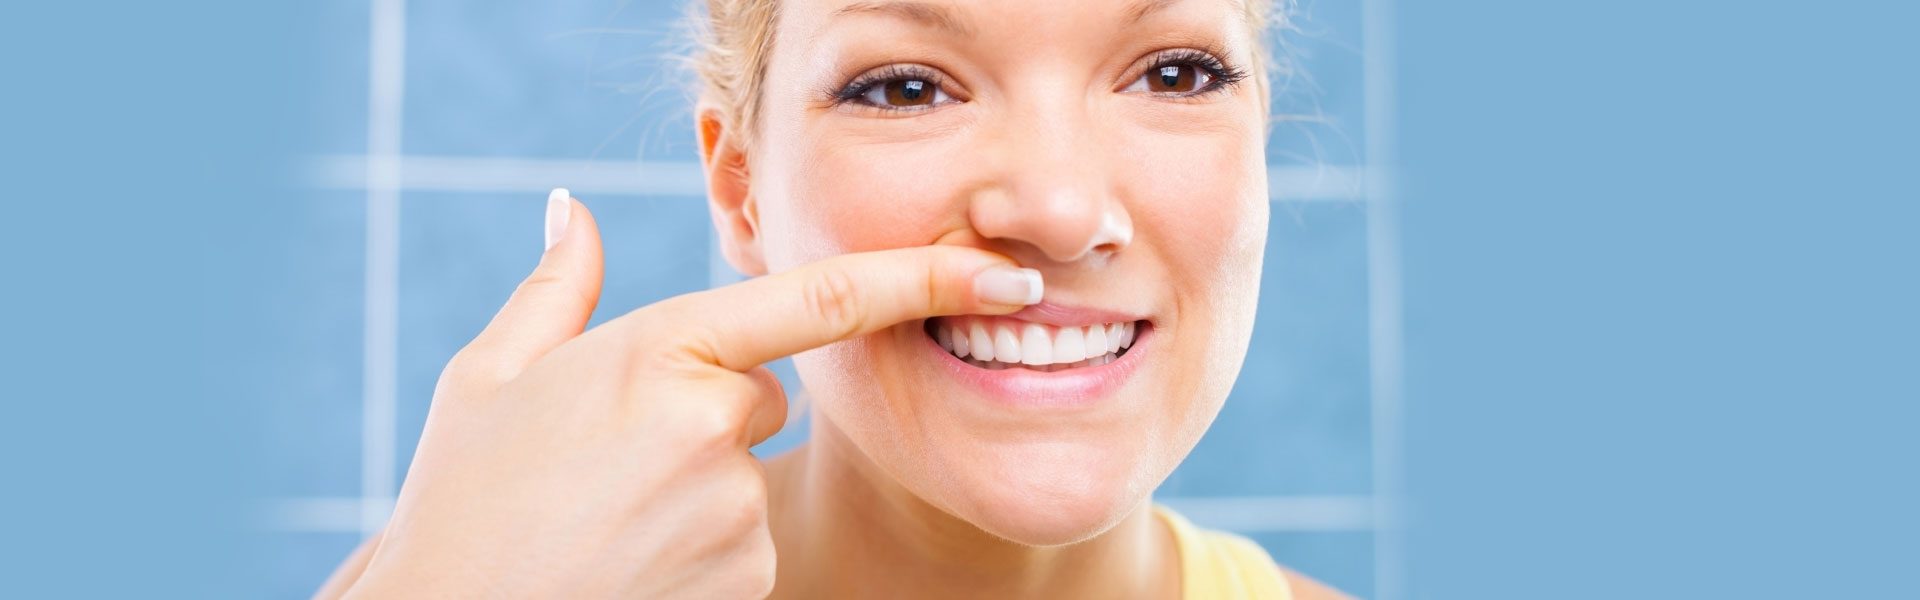 Gum Disease and the Oral-Systemic Connection